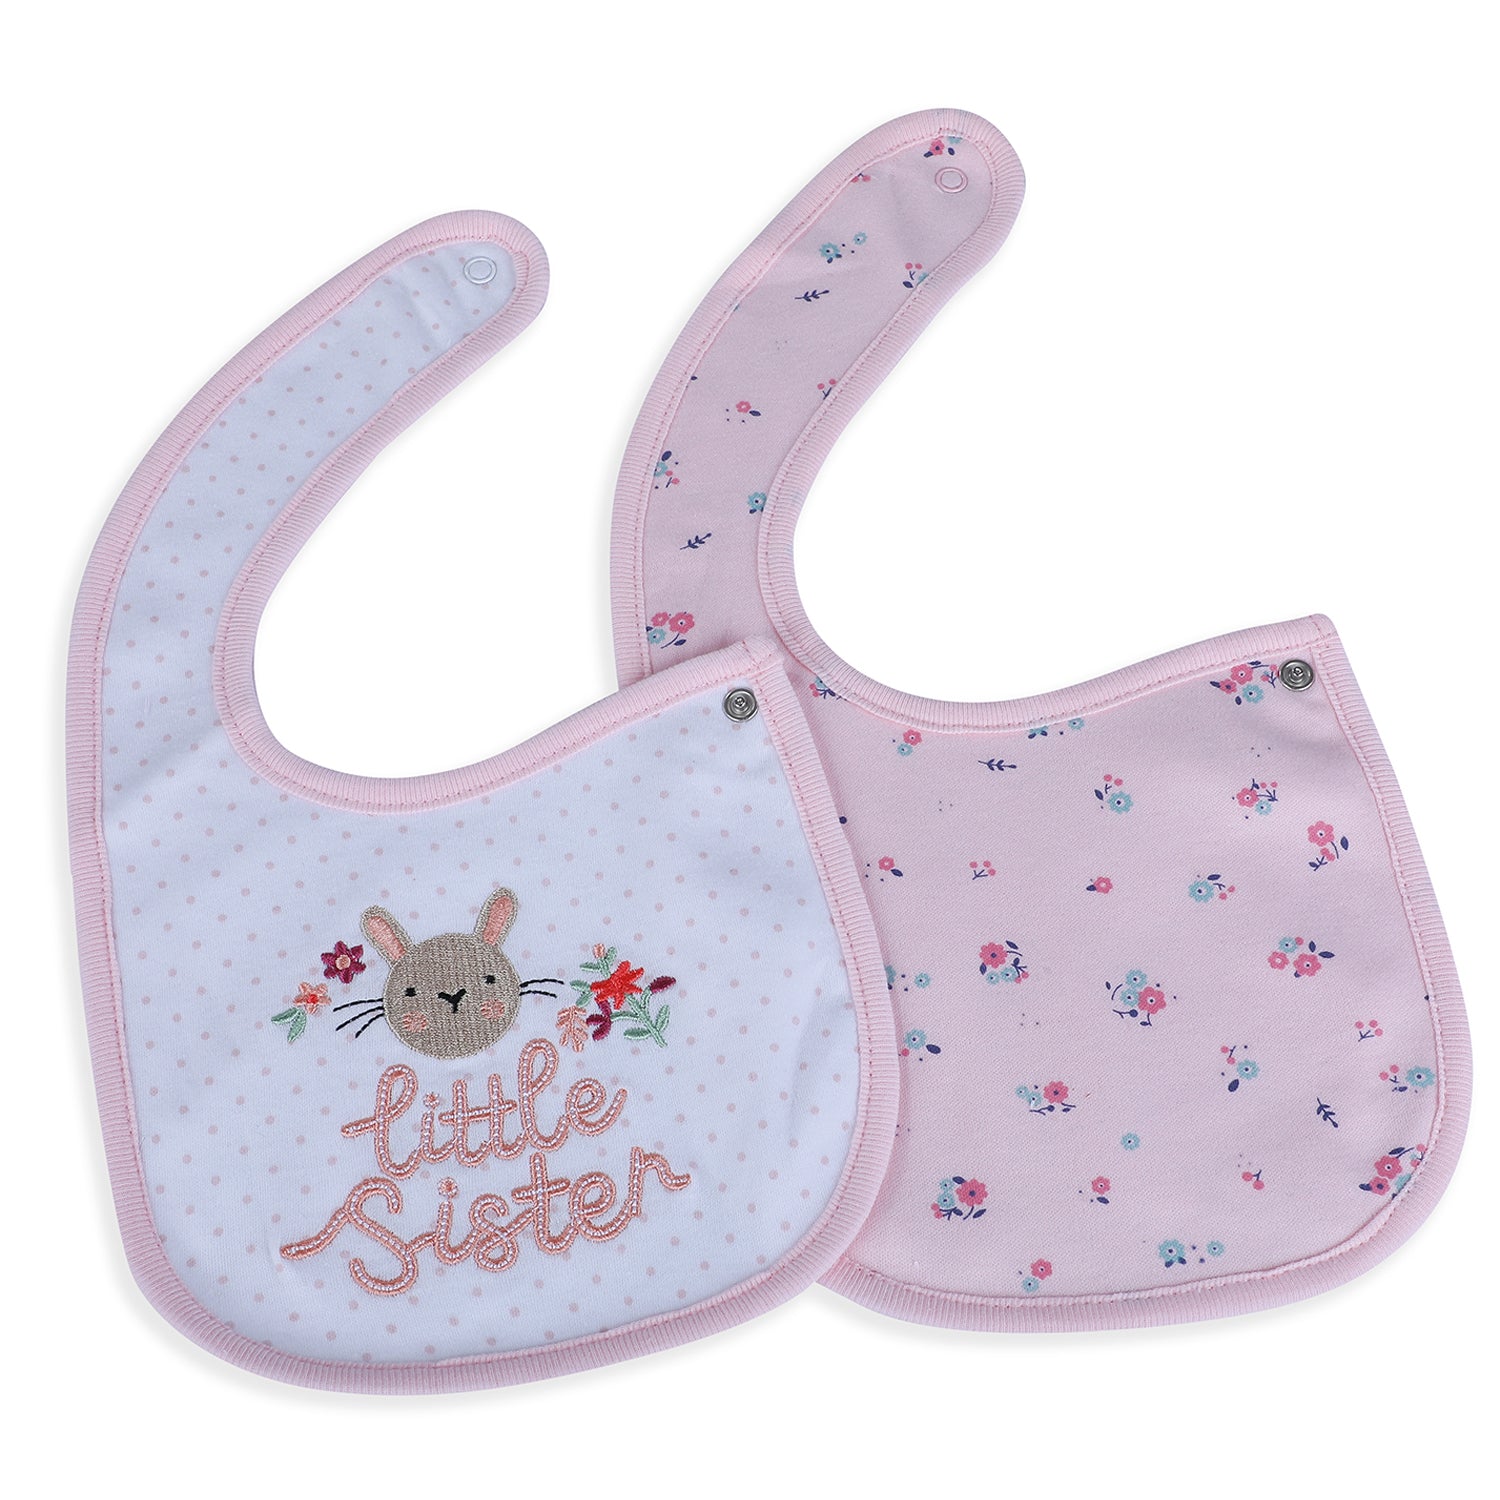 Baby Moo Little Sister Cotton 2 Pack Buttoned Feeding Bibs - Pink - Baby Moo